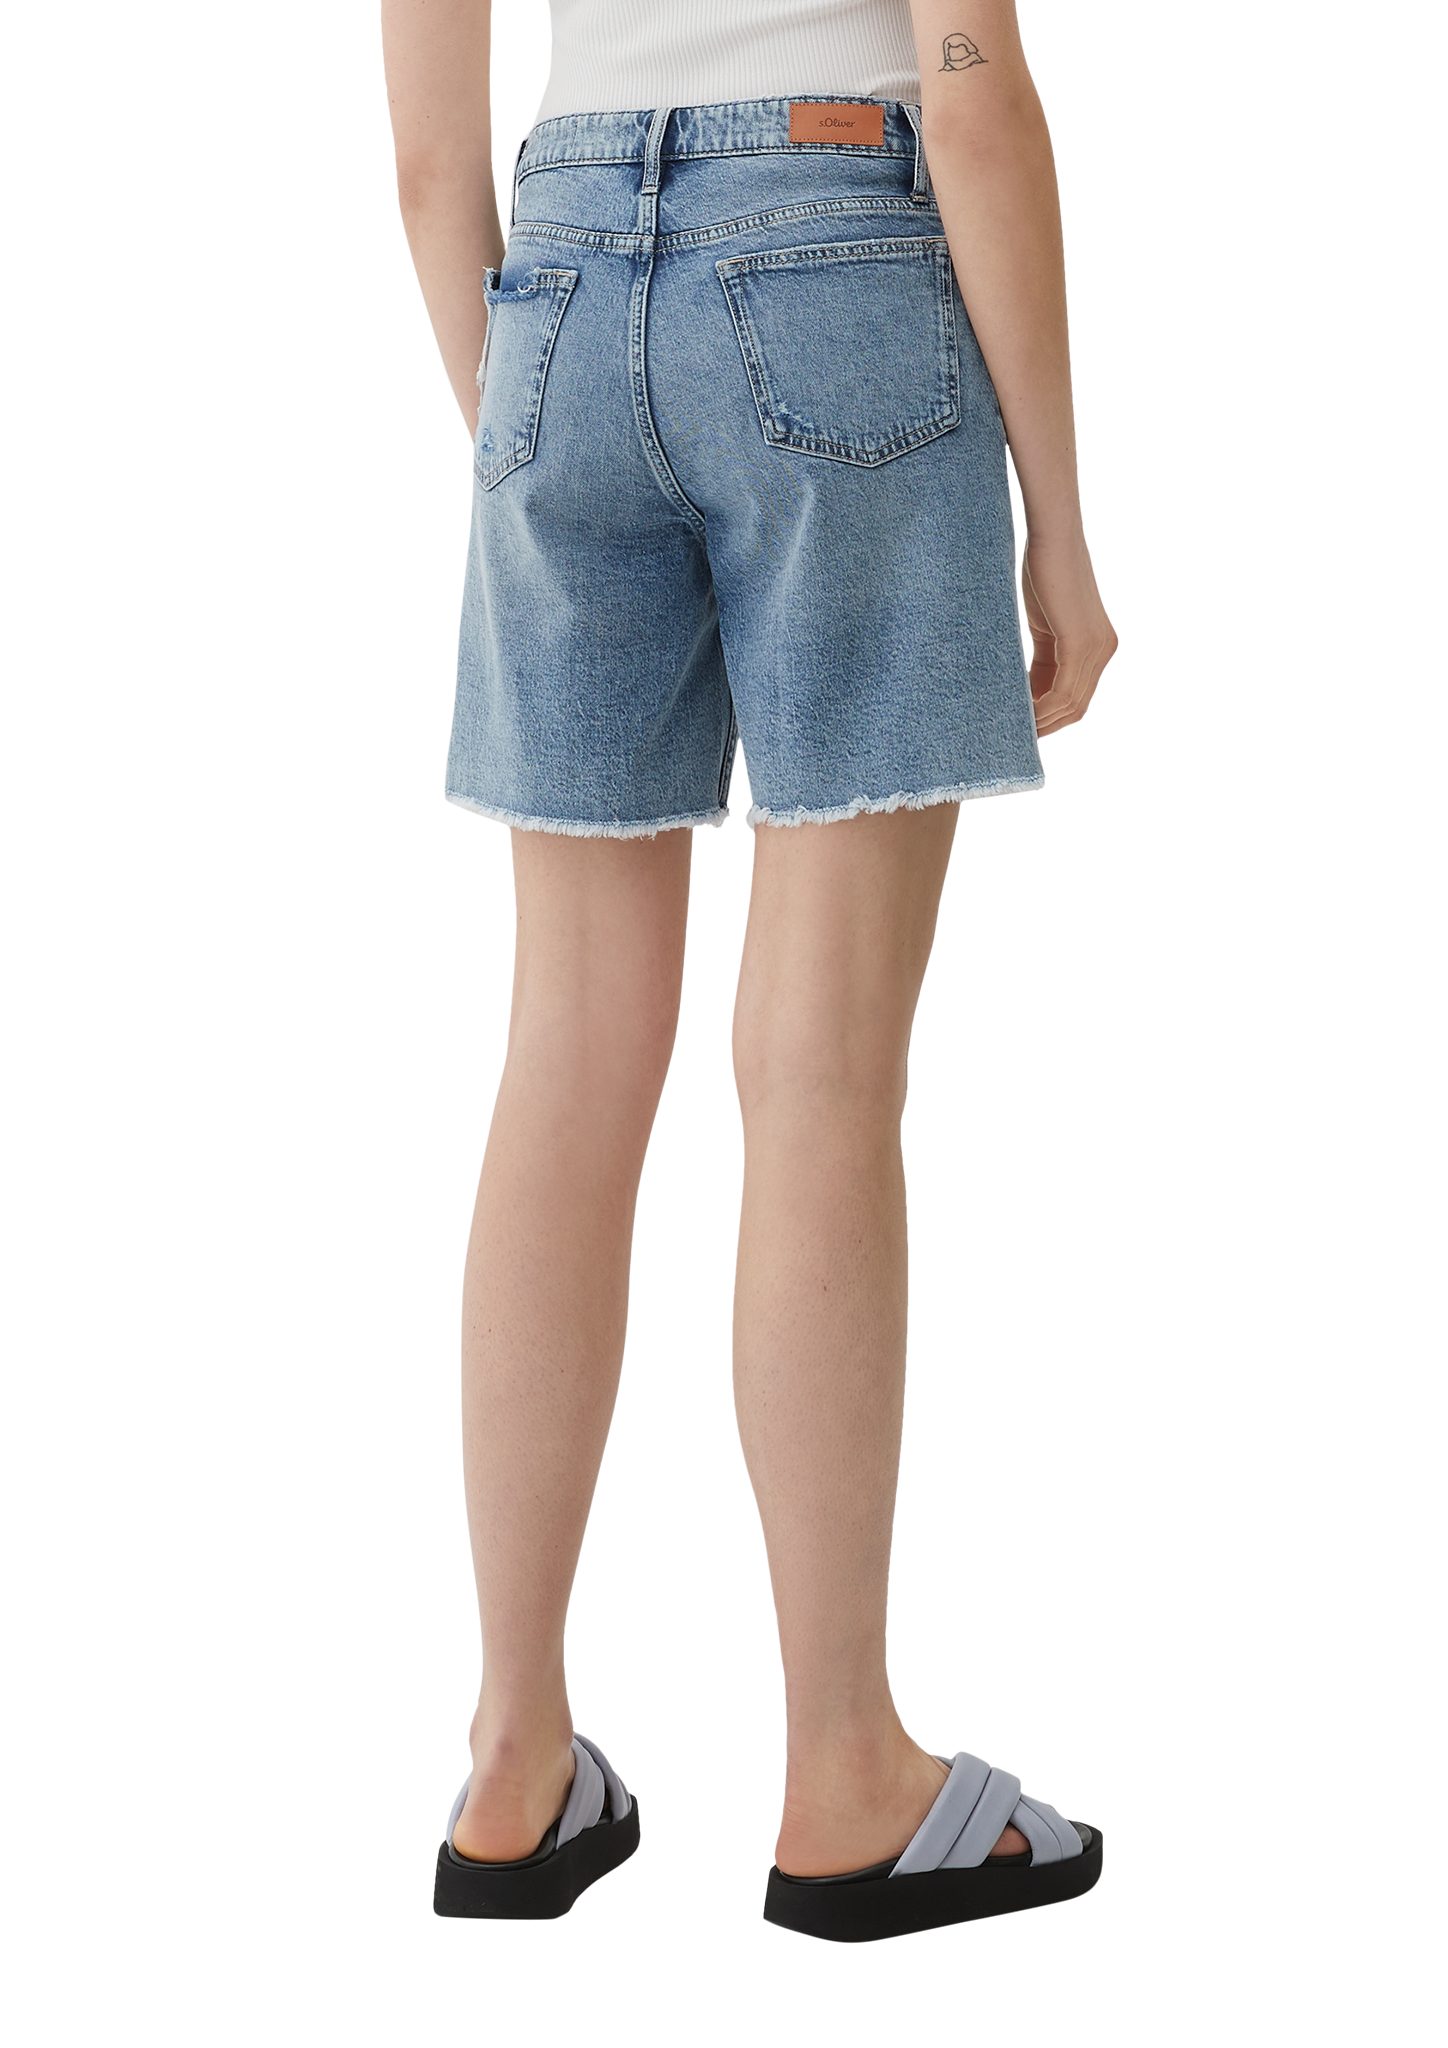 Kontrast-Details Jeansshorts Mid Waschung, / s.Oliver Destroyes, / Fit Relaxed Jeans-Shorts / Leg Straight Rise